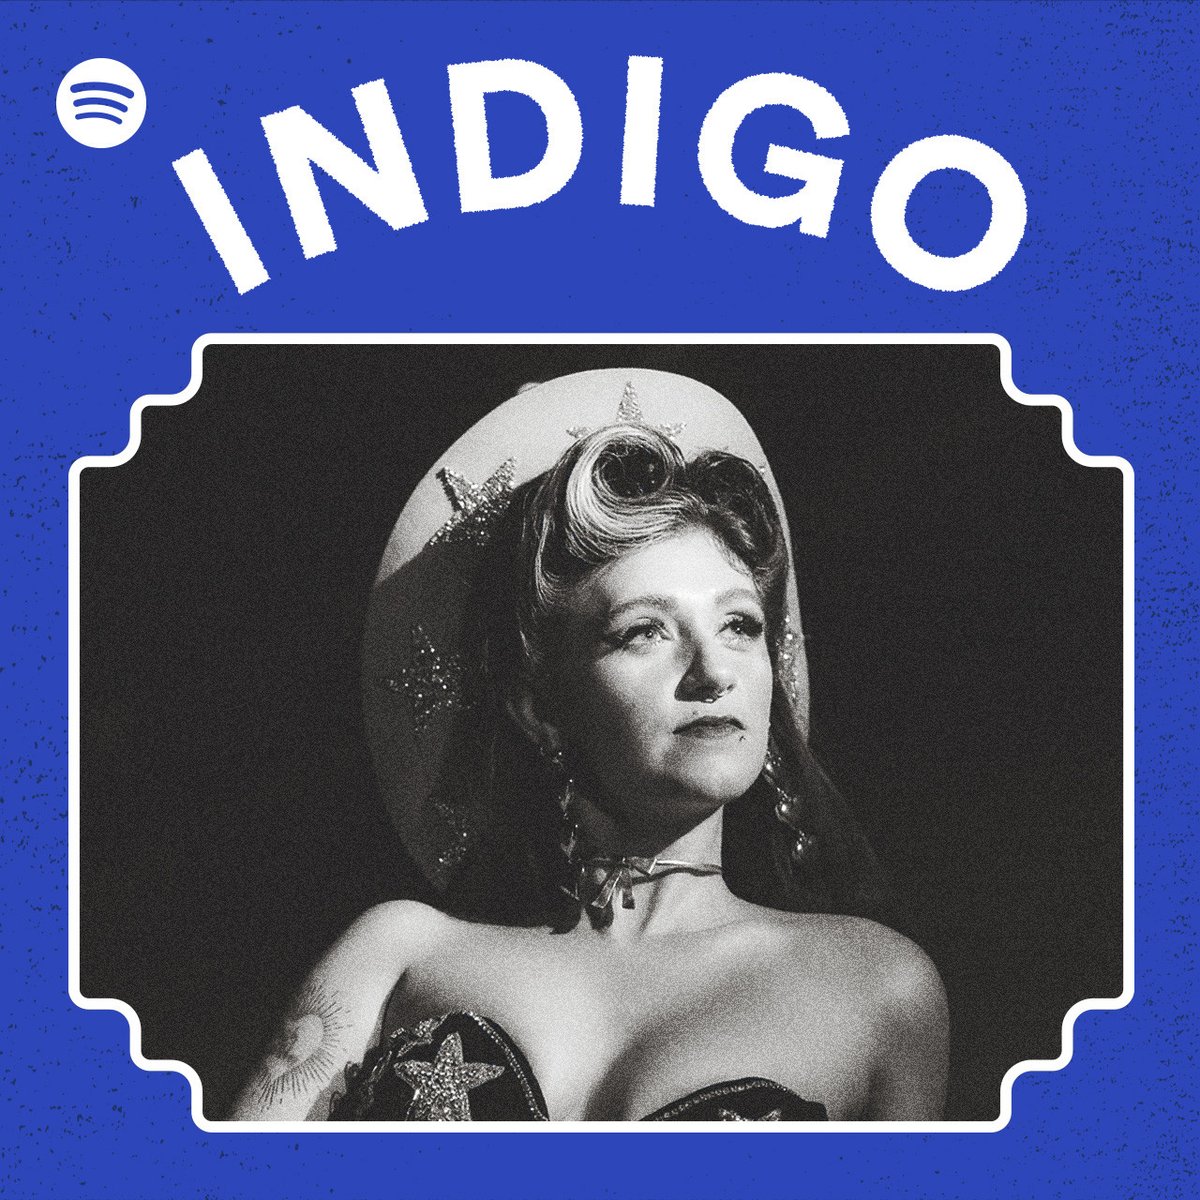 Thanks @Spotify for featuring American Dreaming on your Indigo playlist 💙 Listen here: open.spotify.com/playlist/37i9d…